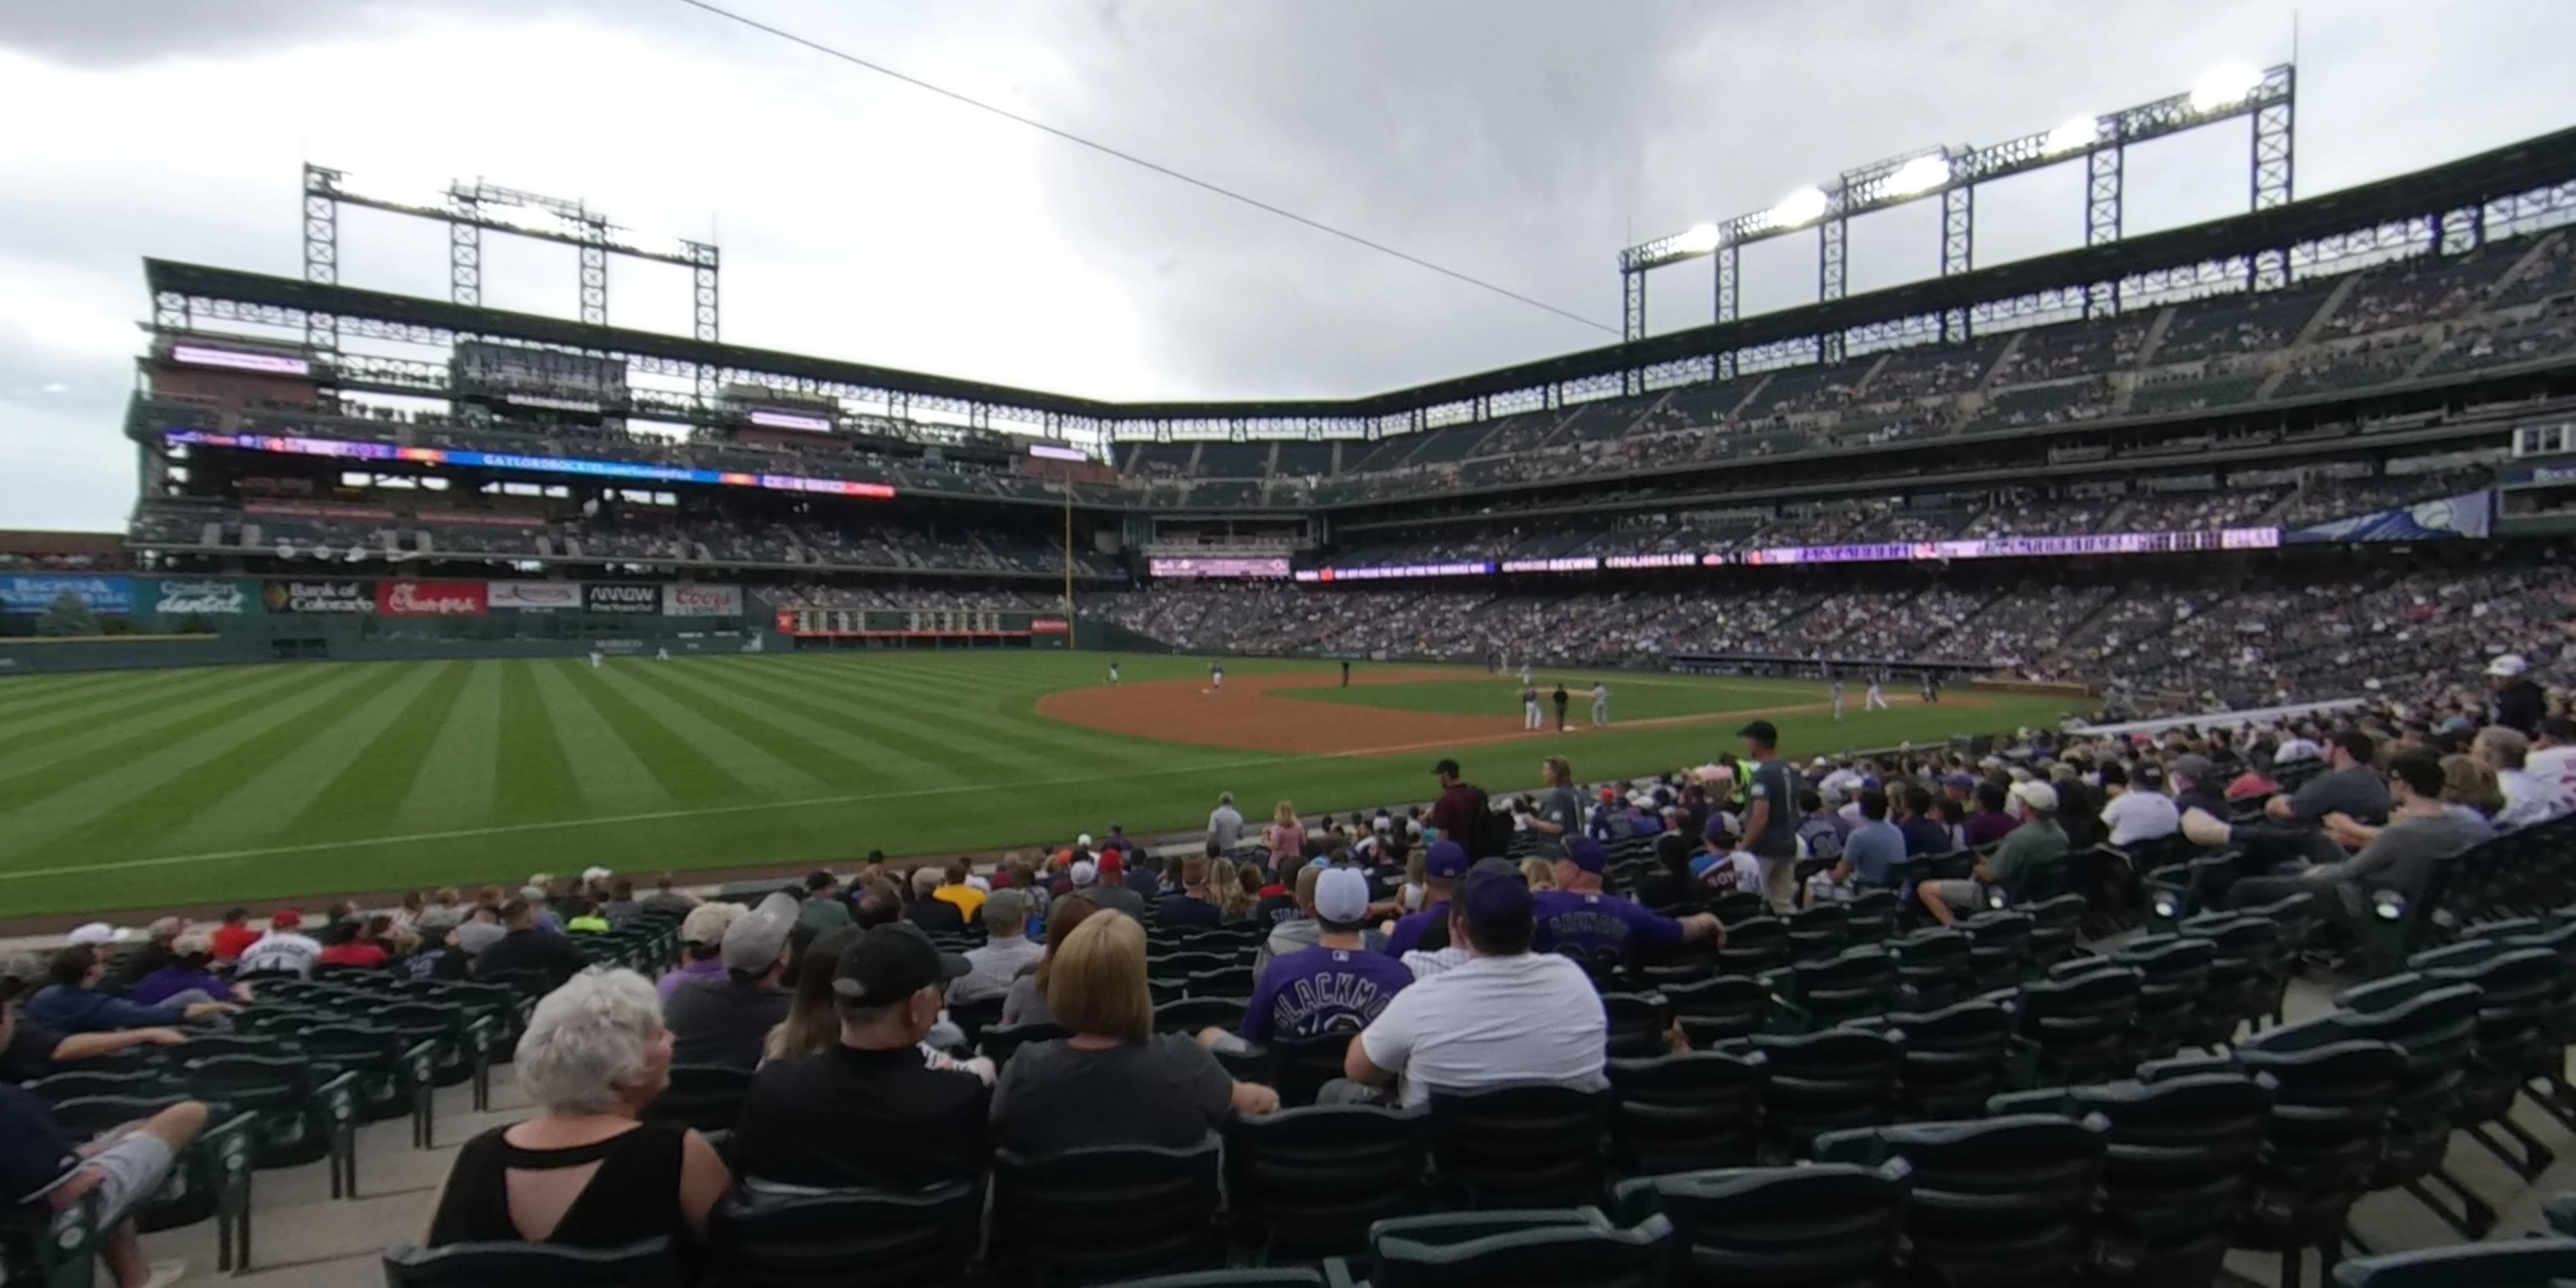 Section 144 at Coors Field - RateYourSeats.com